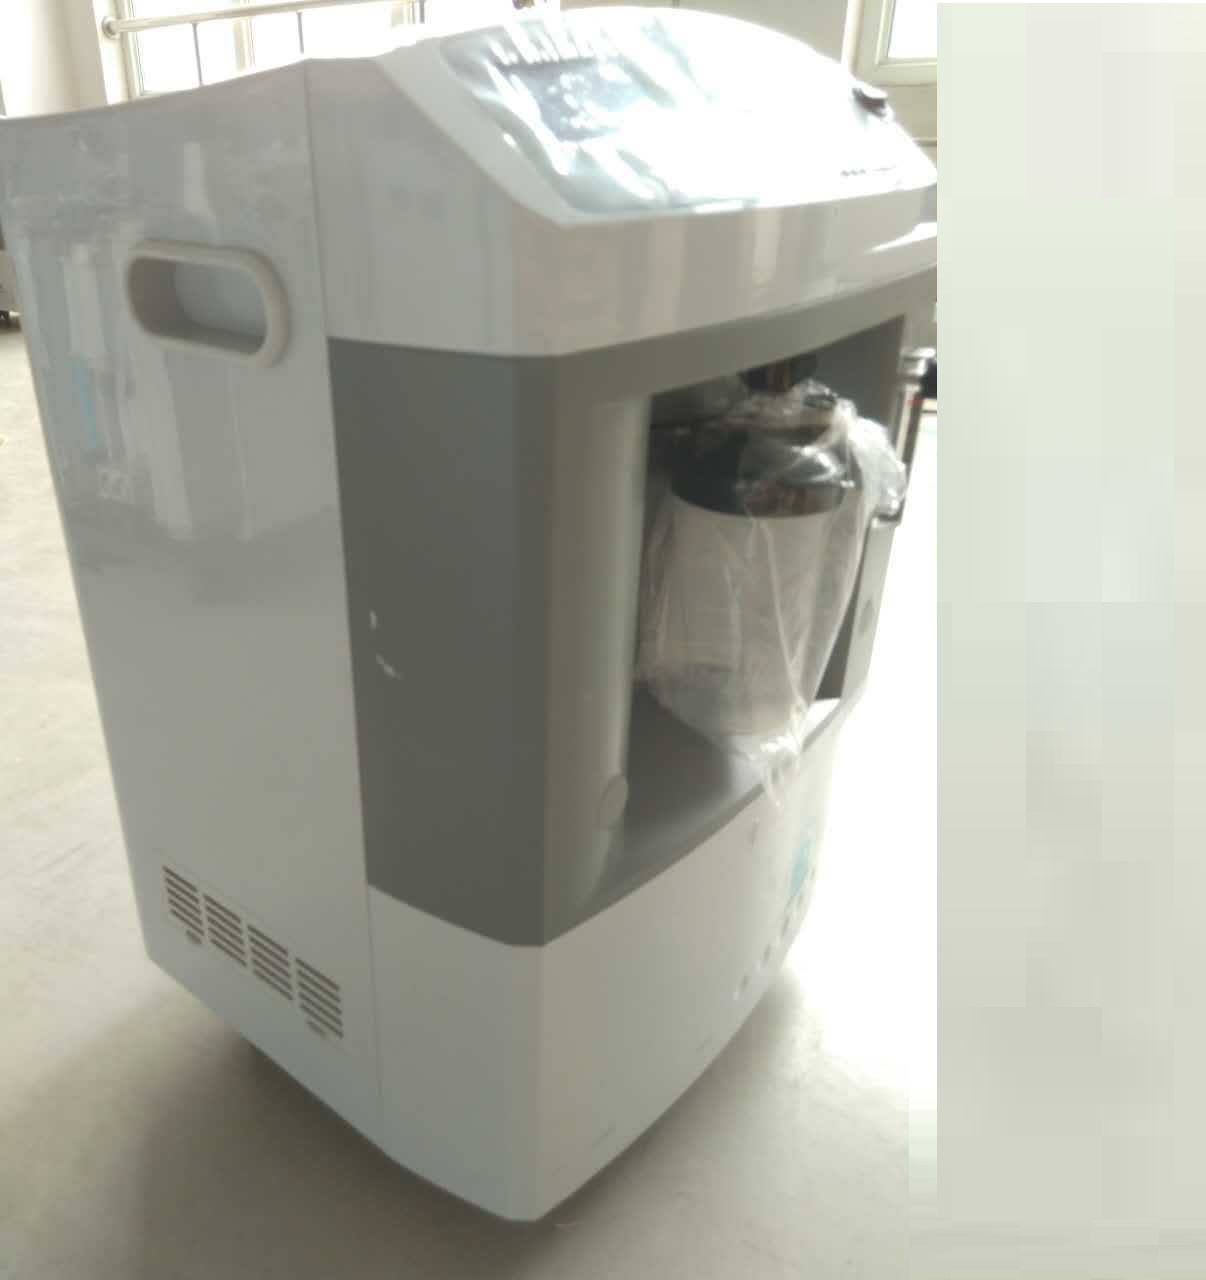 Medical Supply Hospital 10L Psa Oxygen/O2 Concentrator/ Generator Machine with Best Price